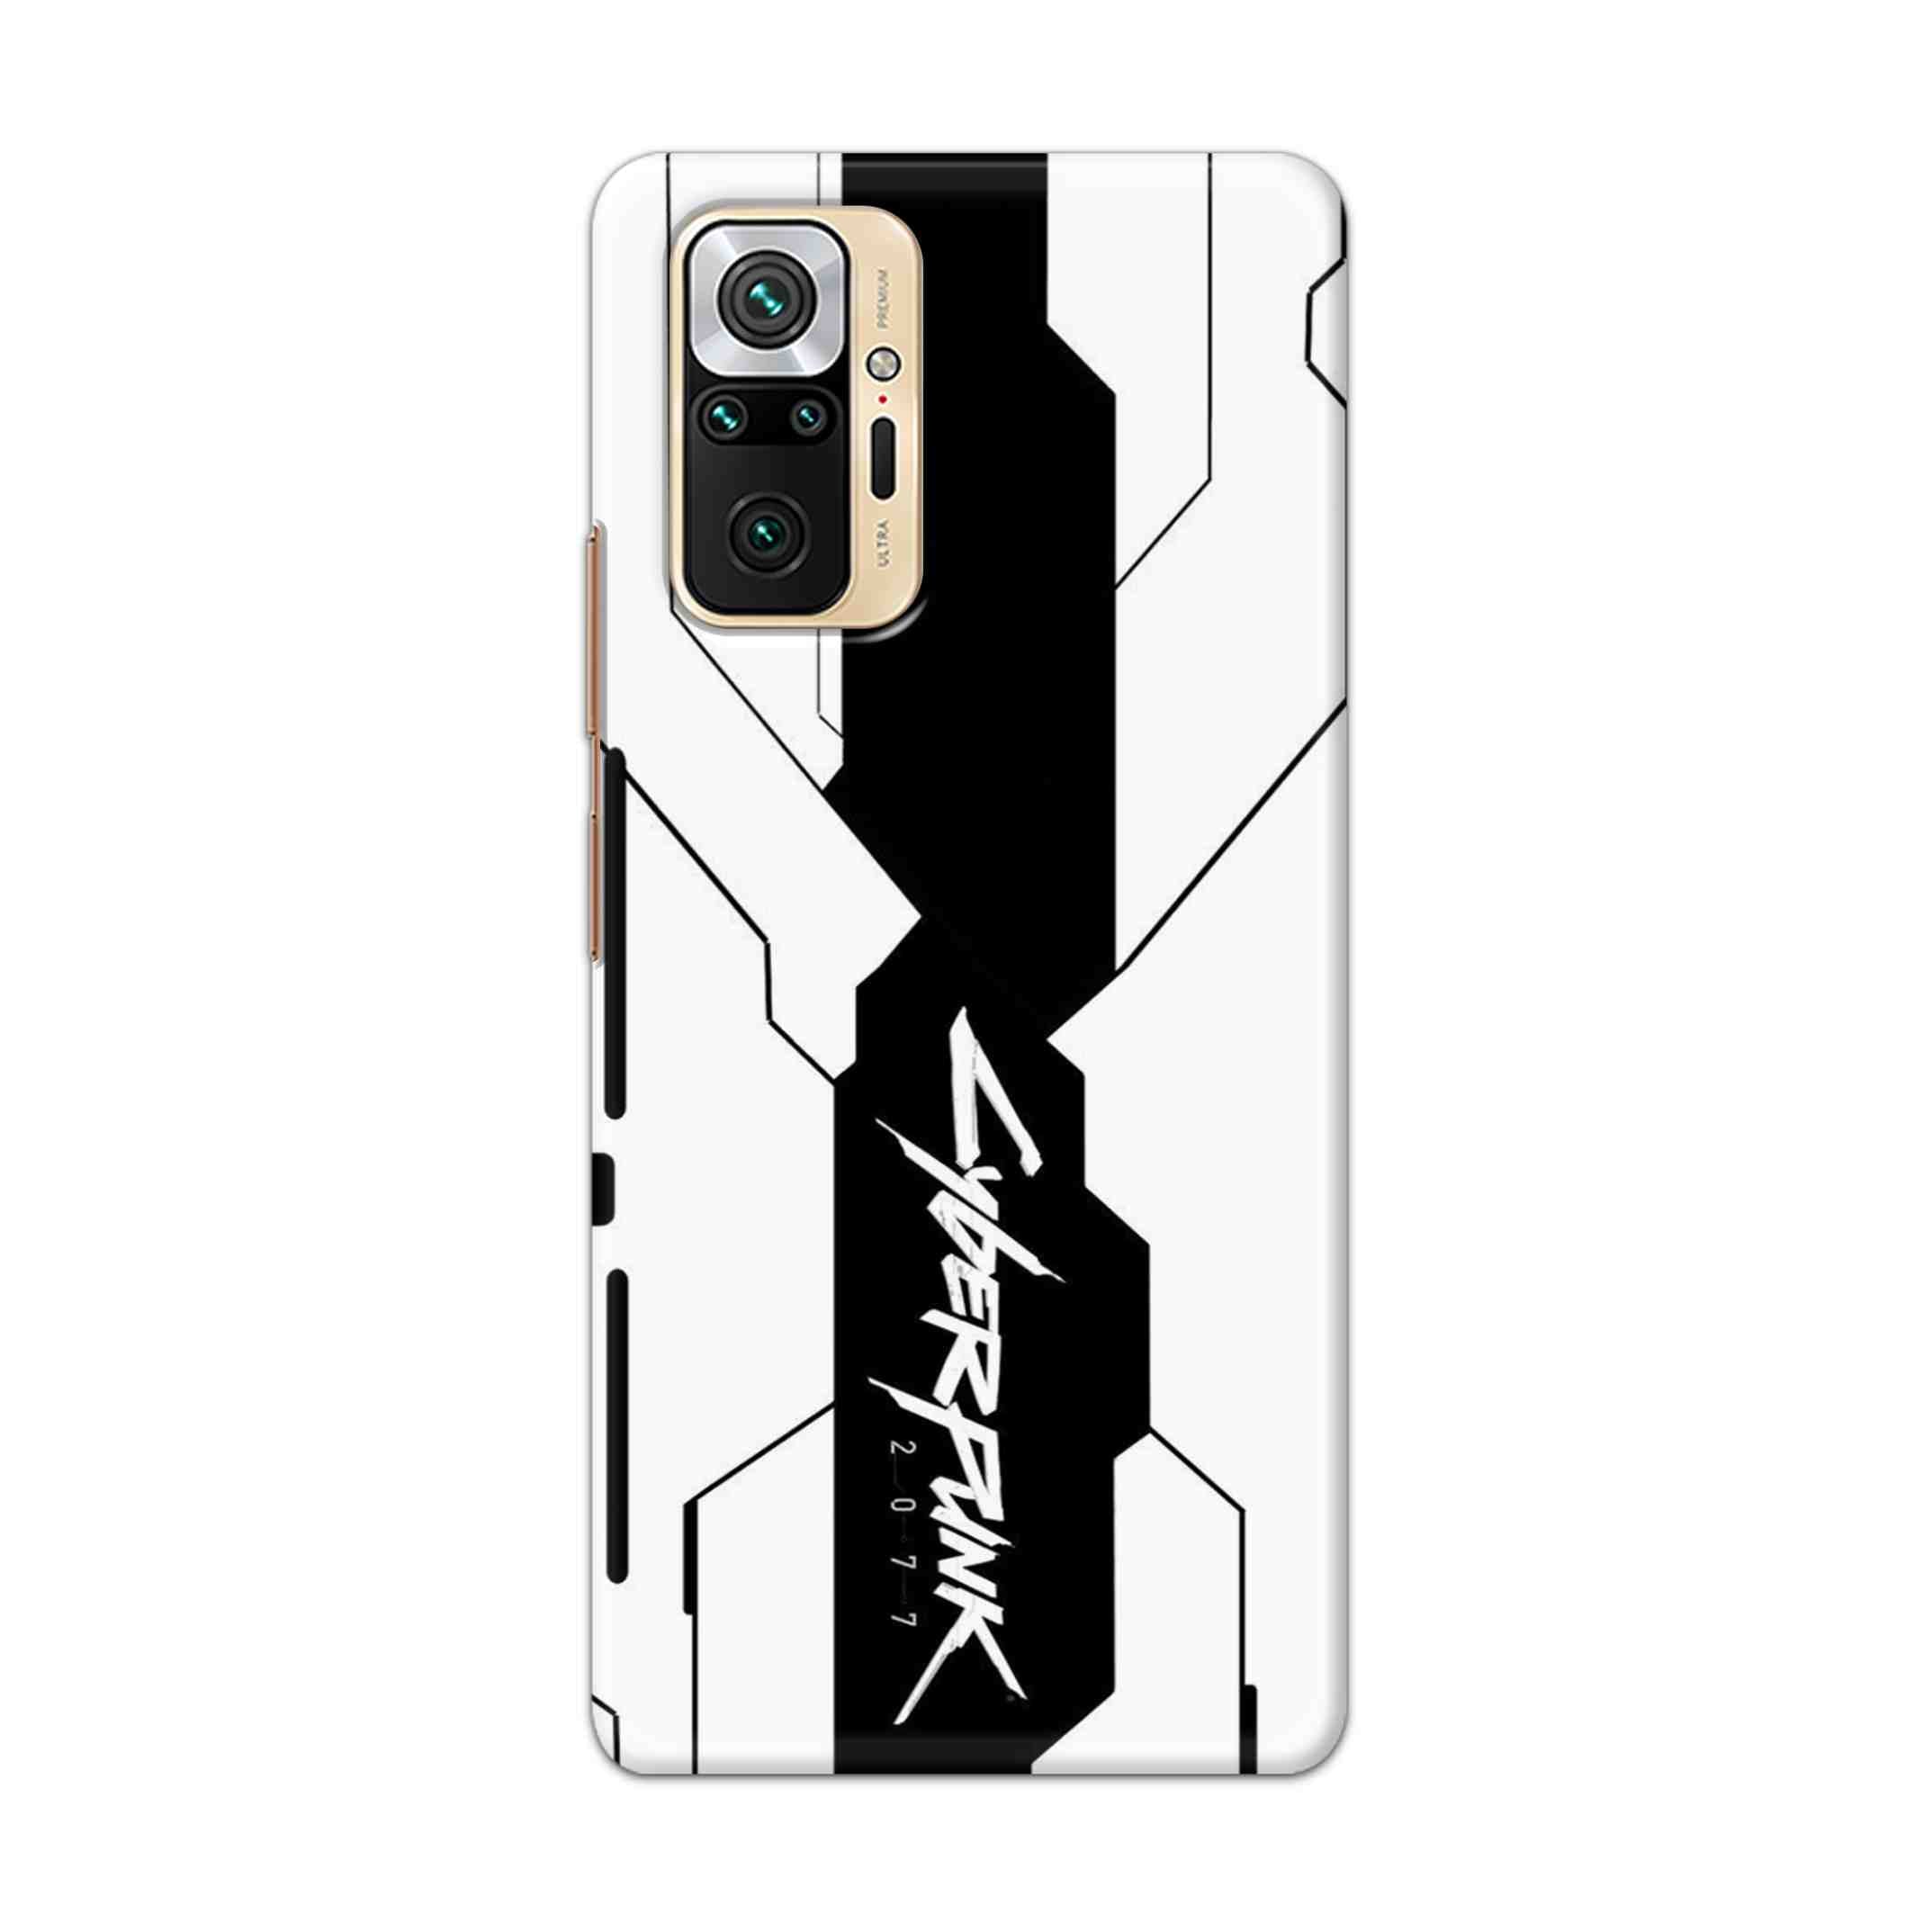 Buy Cyberpunk 2077 Hard Back Mobile Phone Case Cover For Redmi Note 10 Pro Online